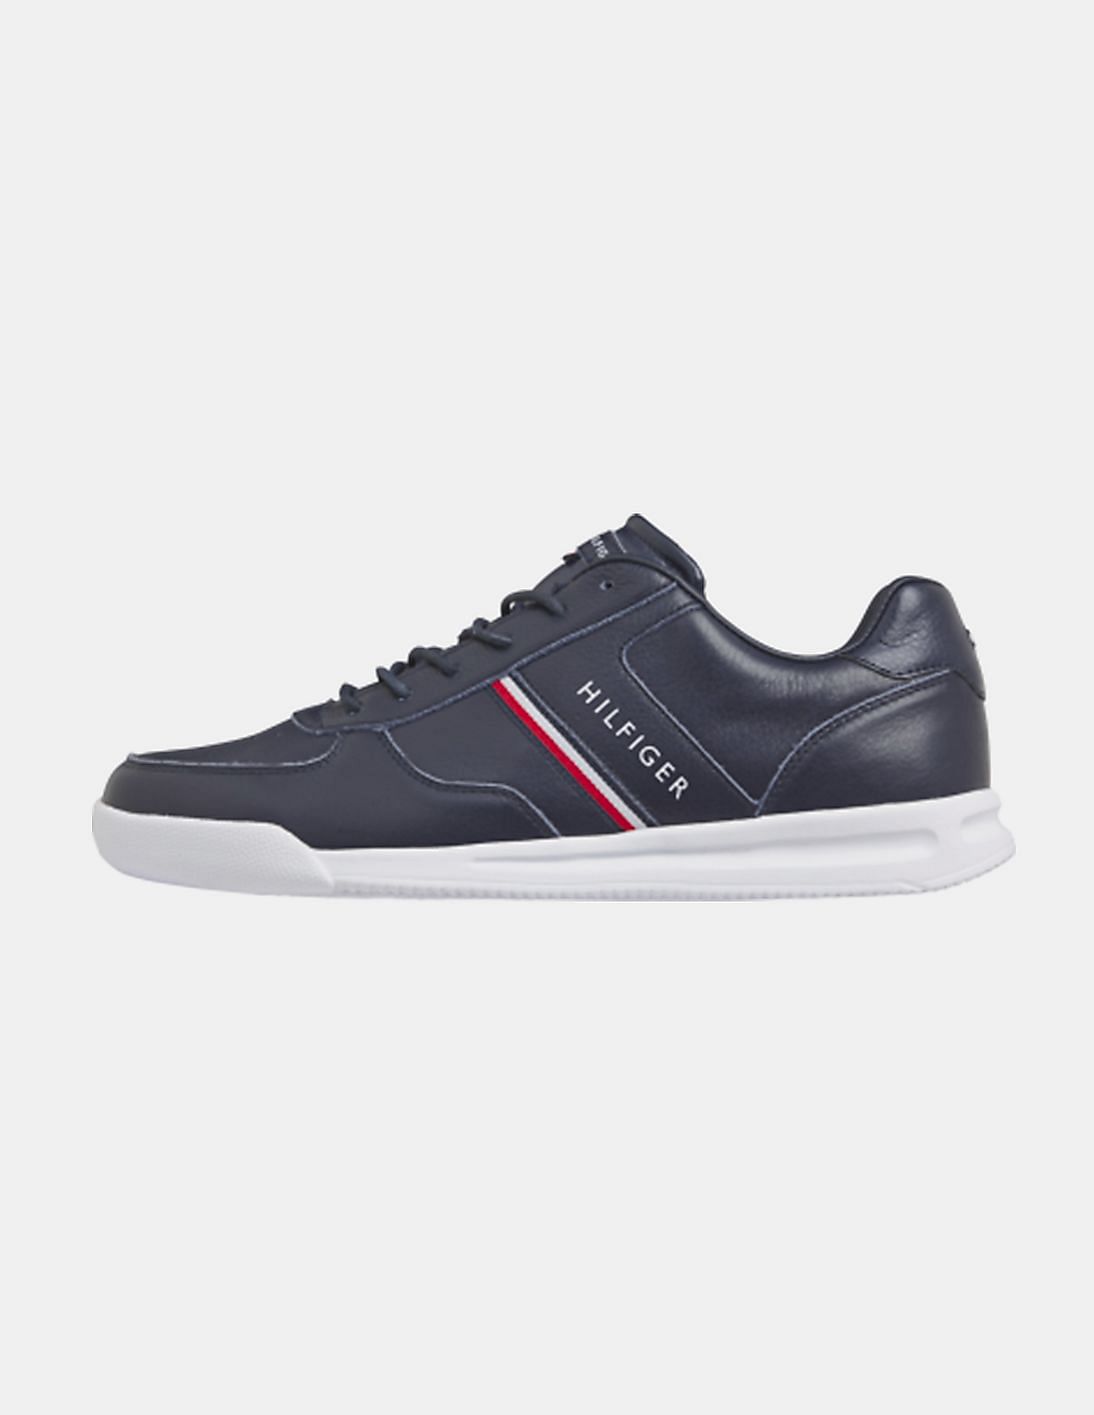 Buy Tommy Hilfiger Men Navy Lightweight Leather Sneakers - NNNOW.com